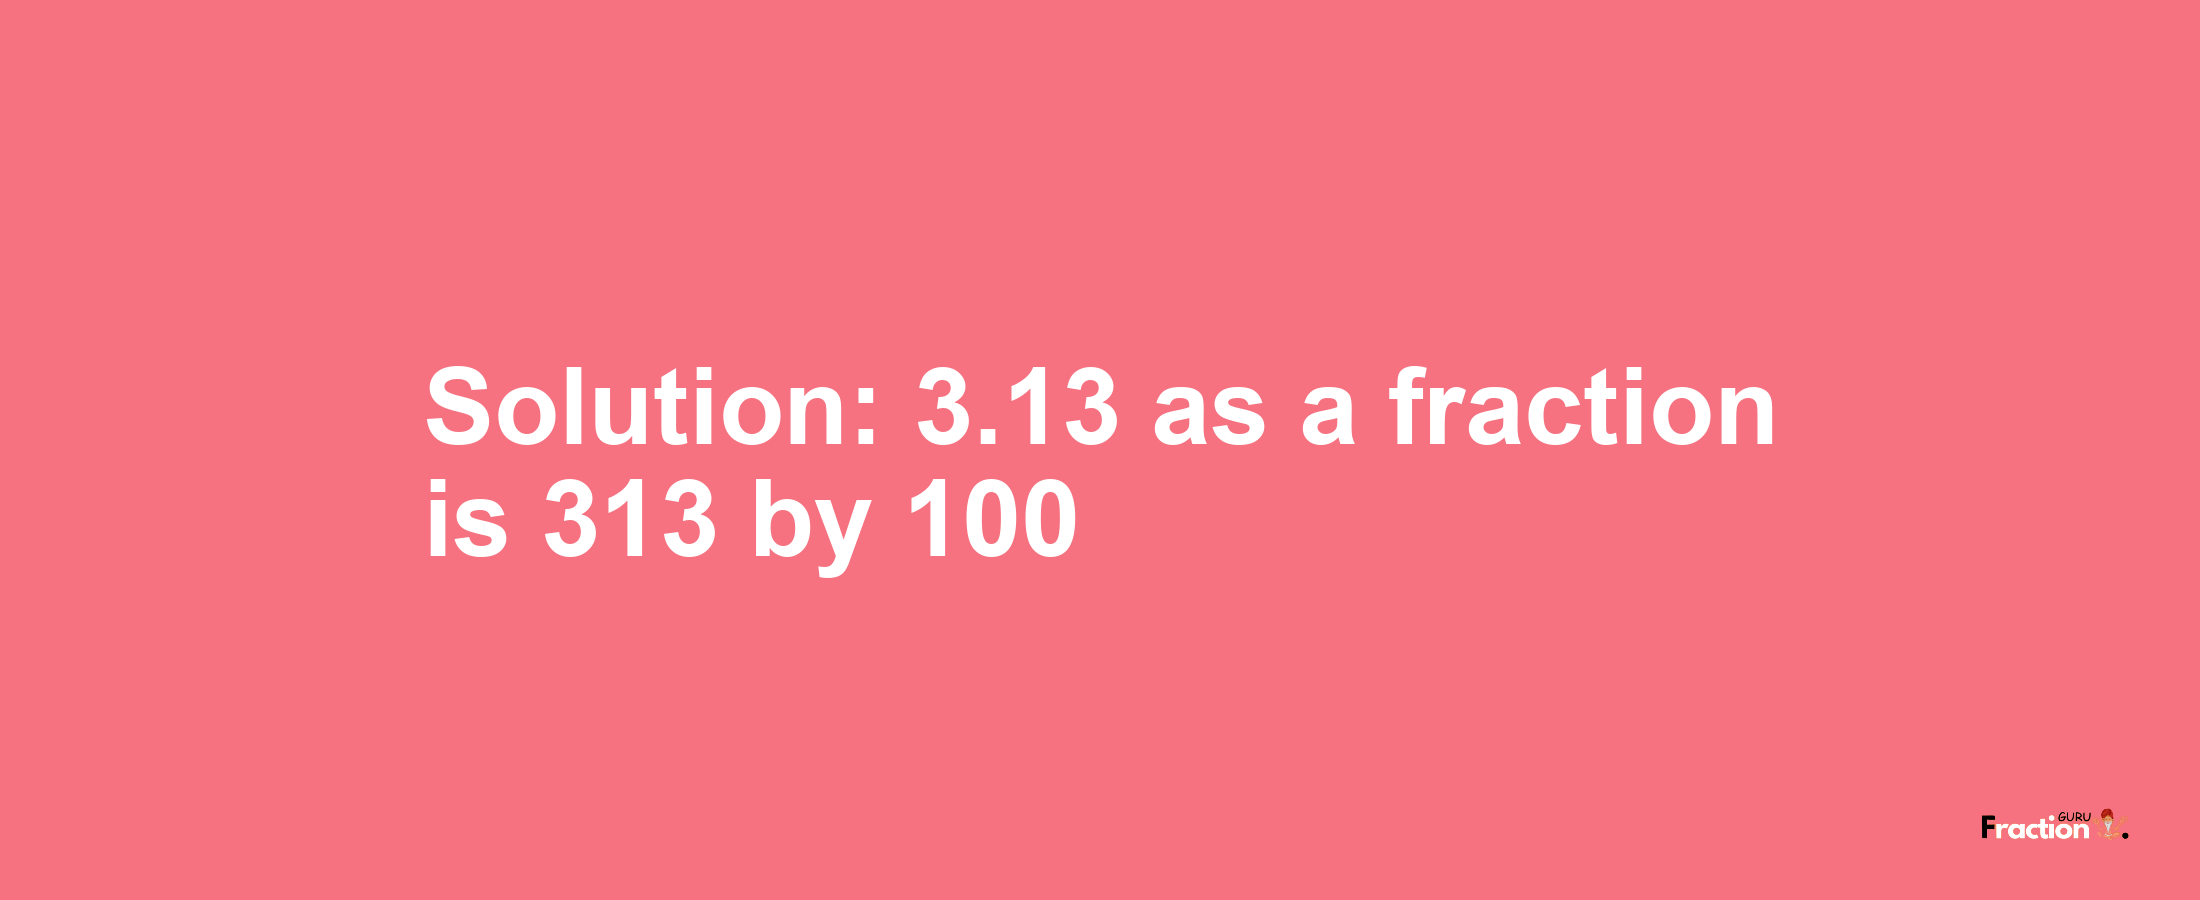 Solution:3.13 as a fraction is 313/100